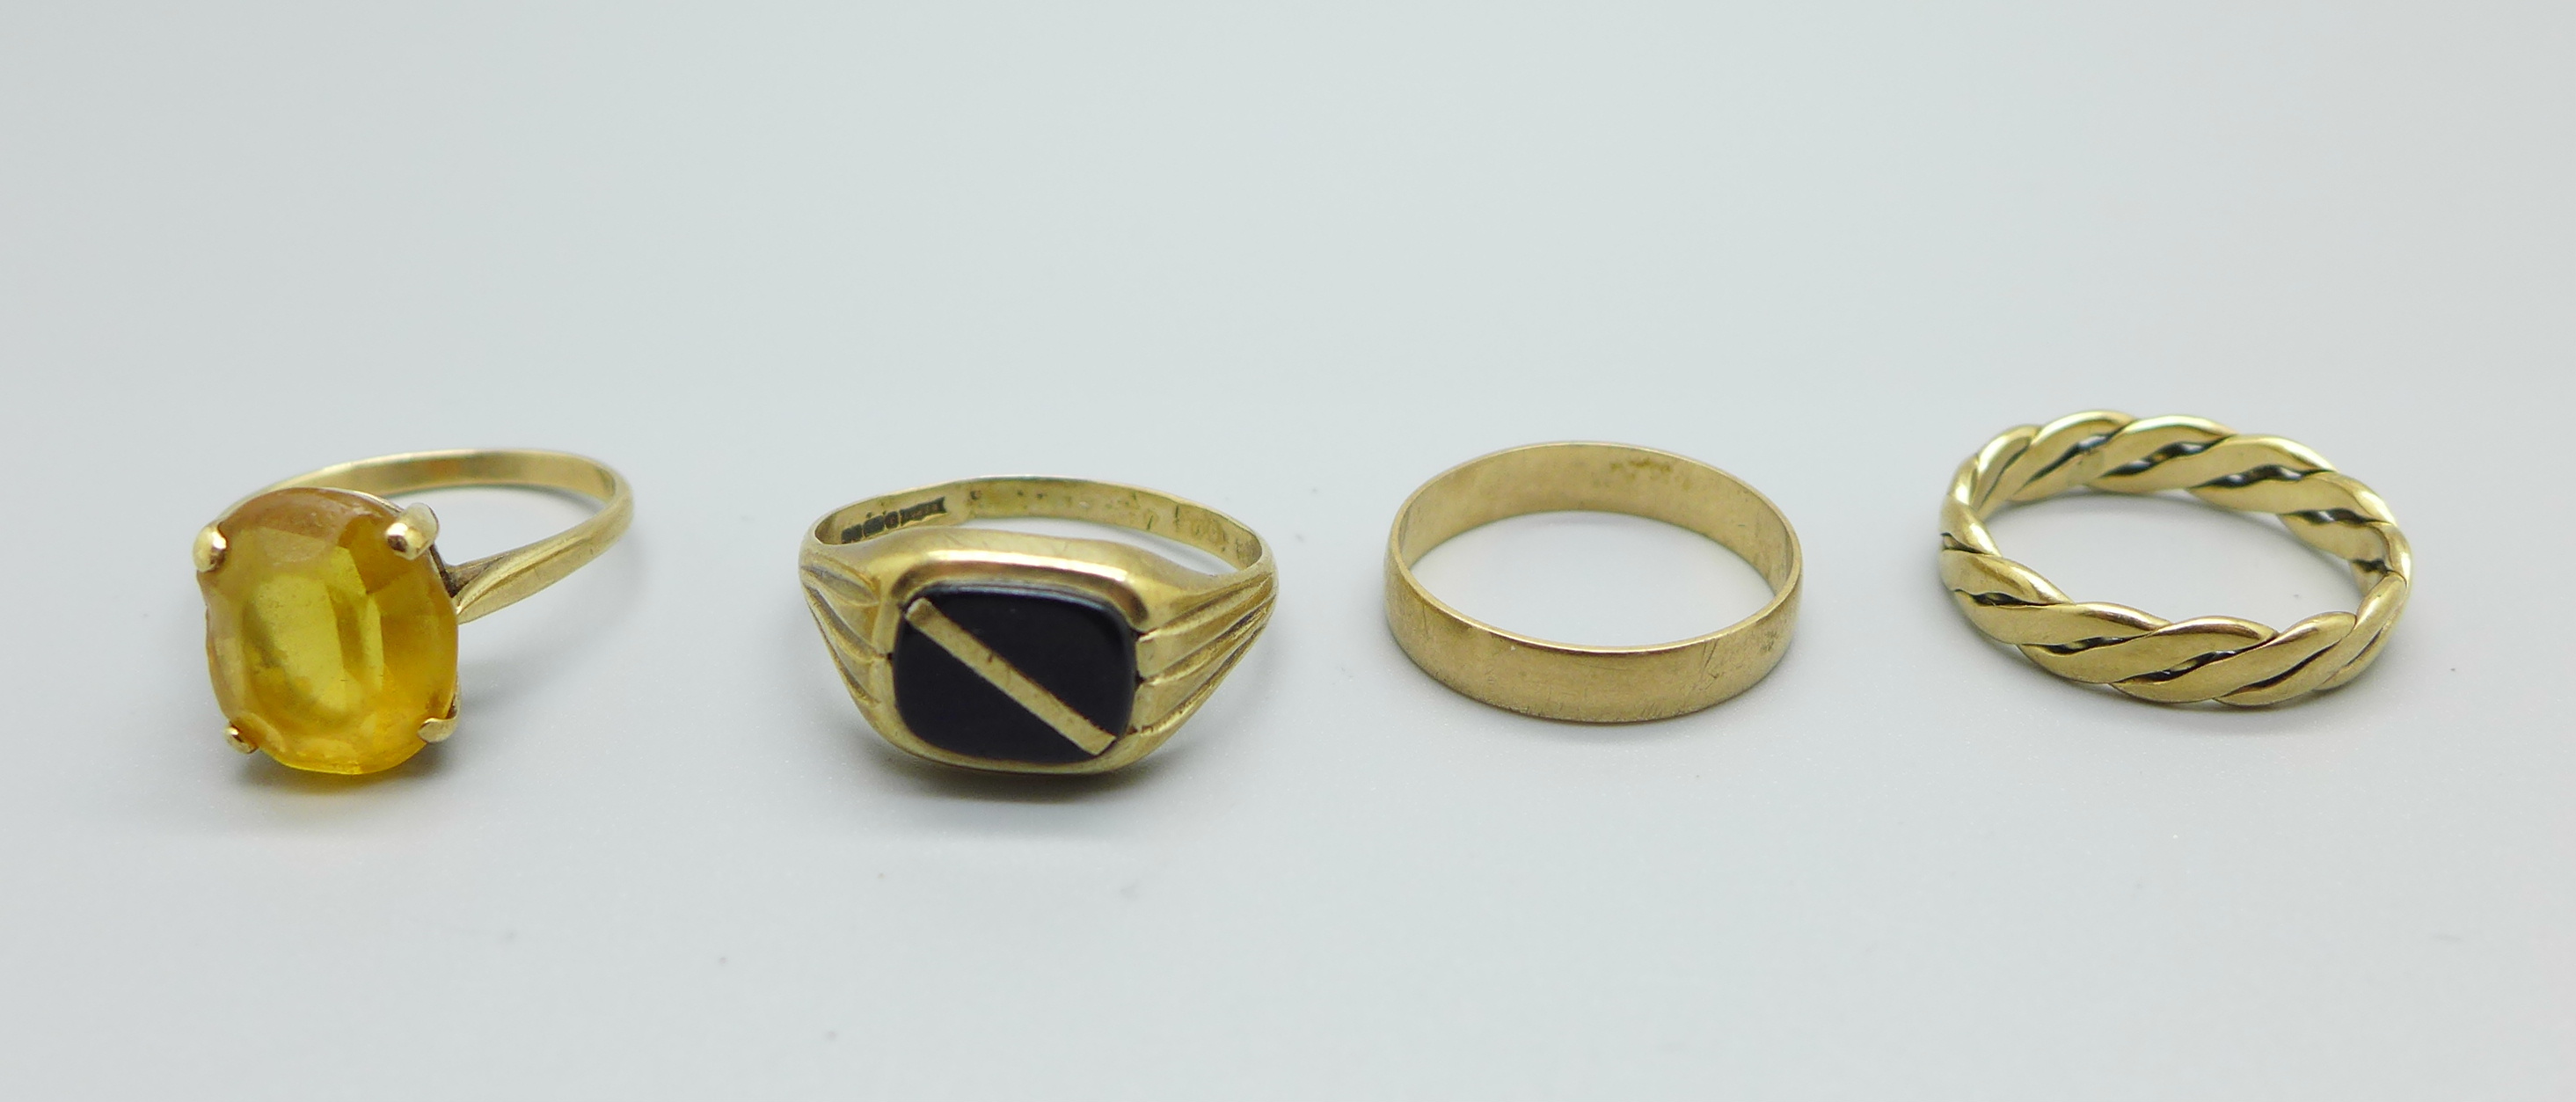 Four 9ct gold rings, total weight 9.5g - Image 2 of 4